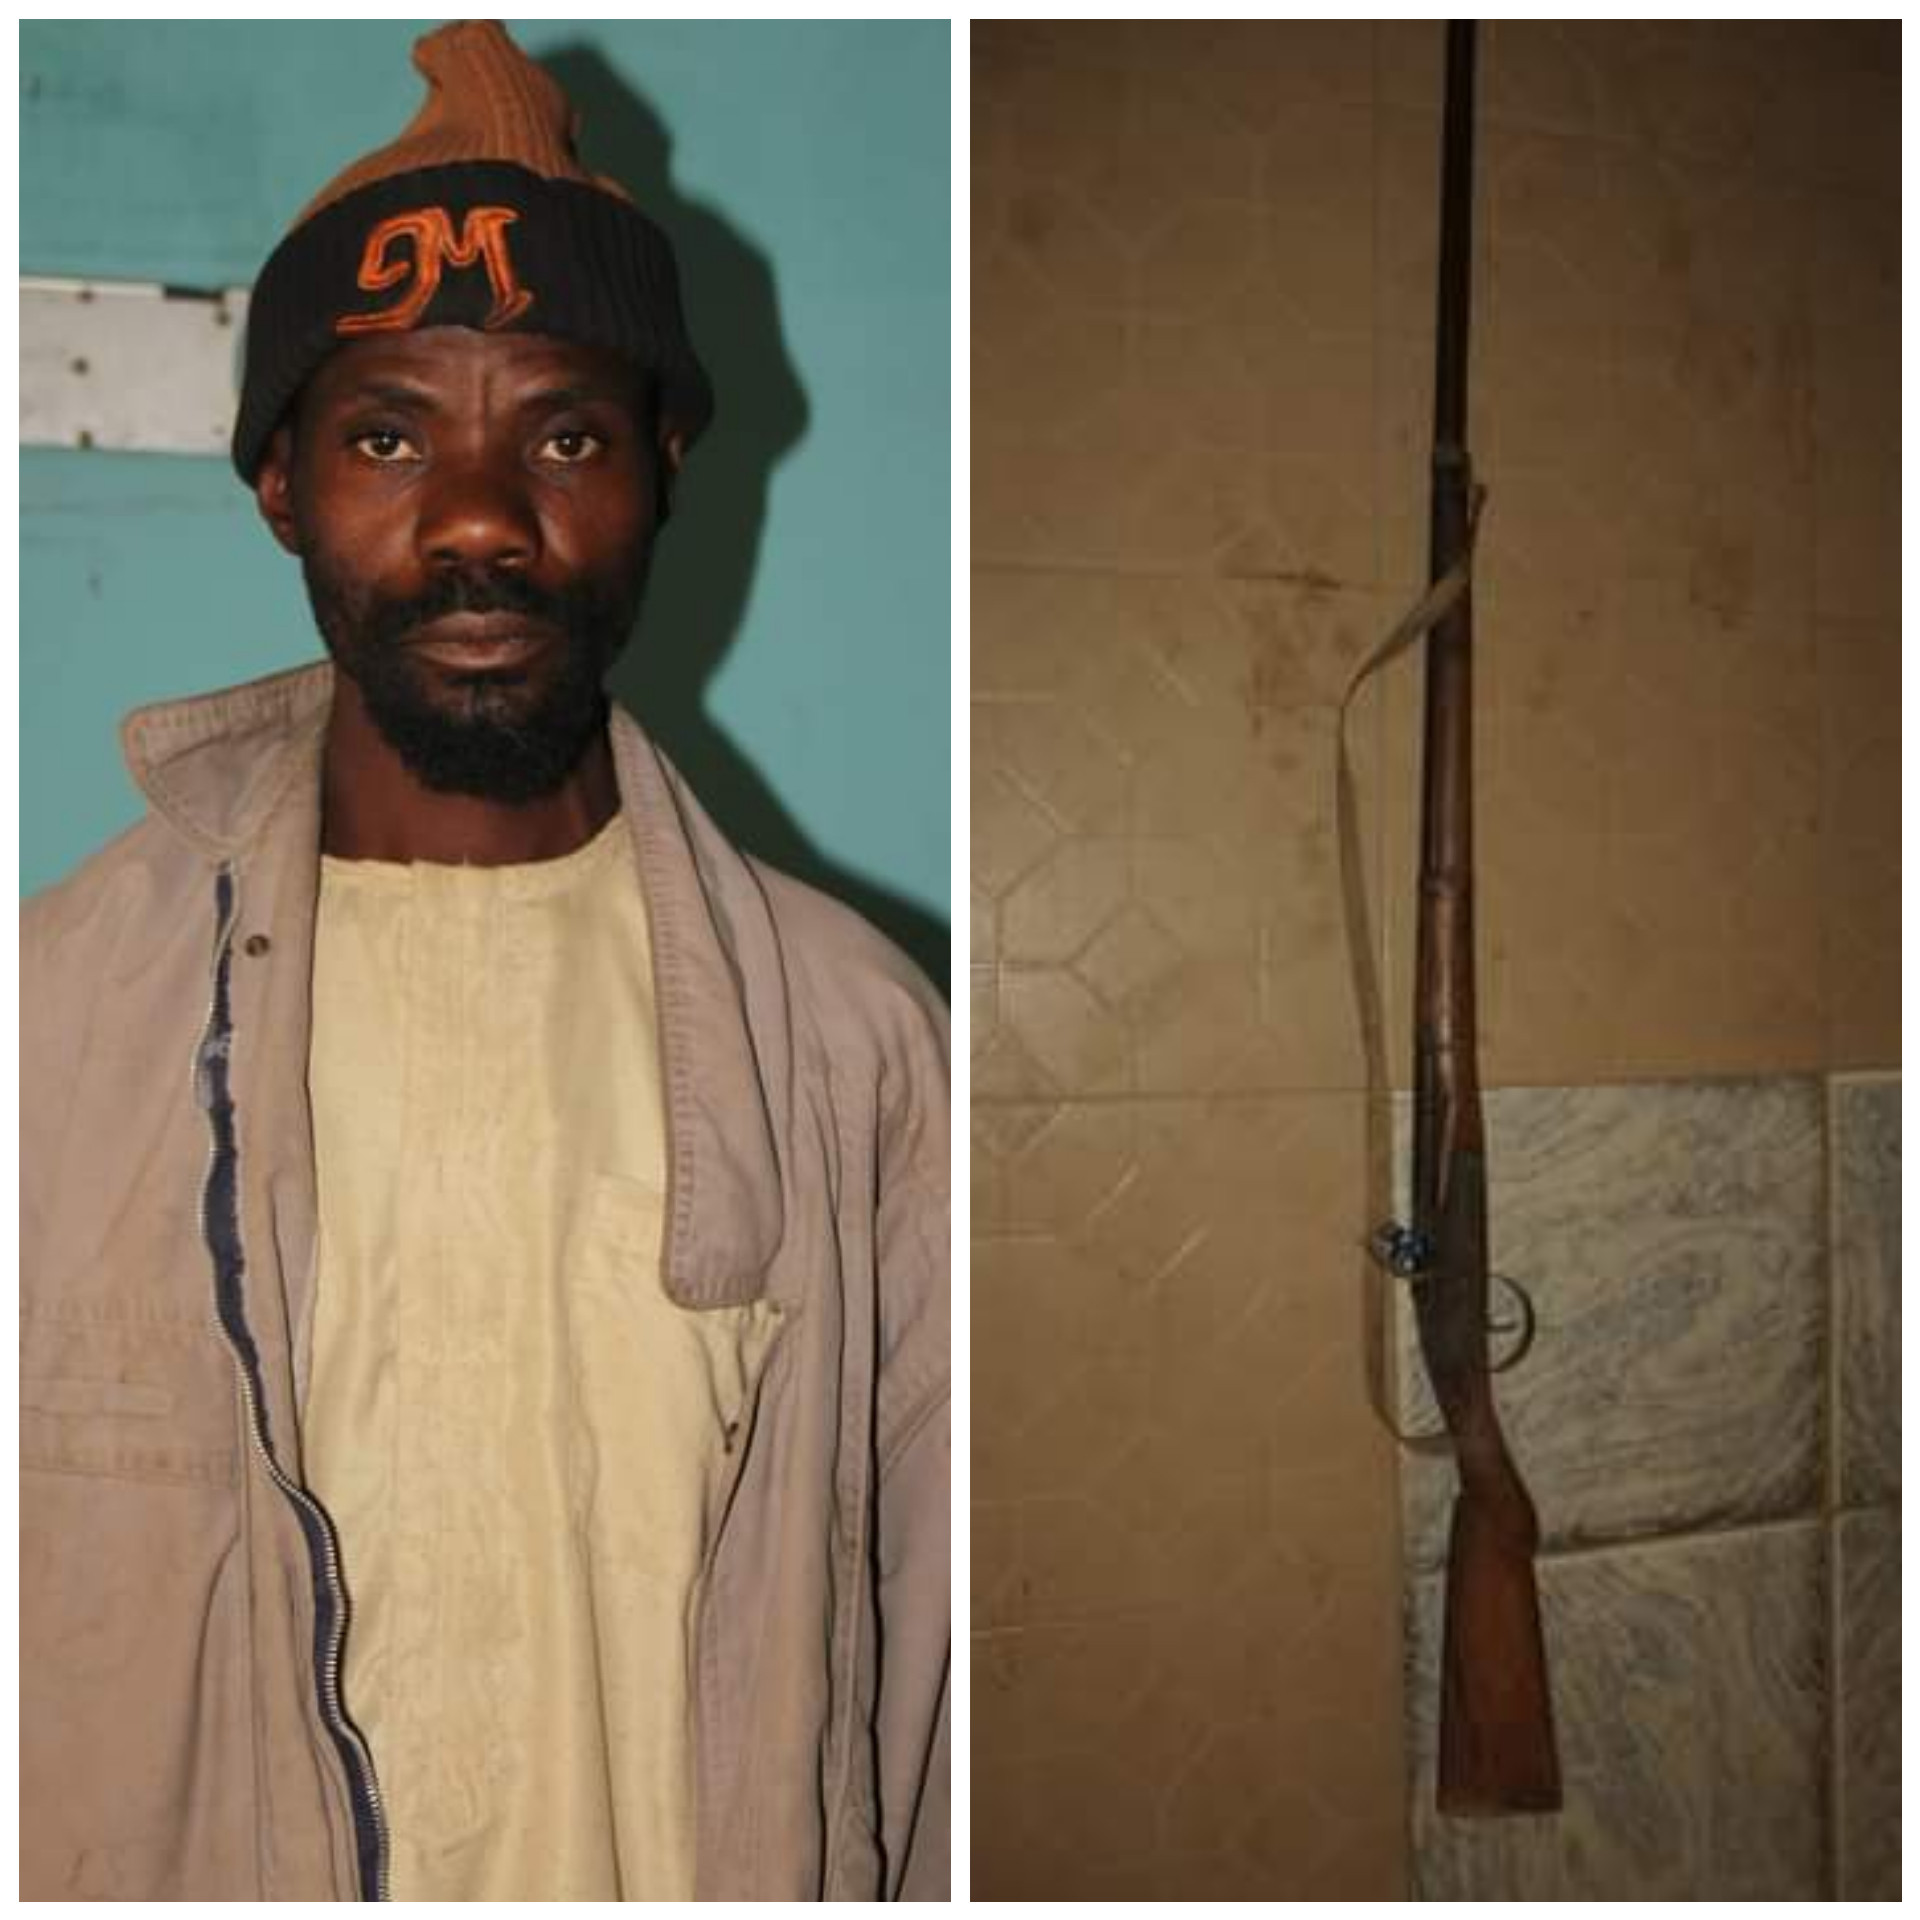 Bauchi man shoots and kills spouse after mistaking her for his son who allegedly threatened to hurt him